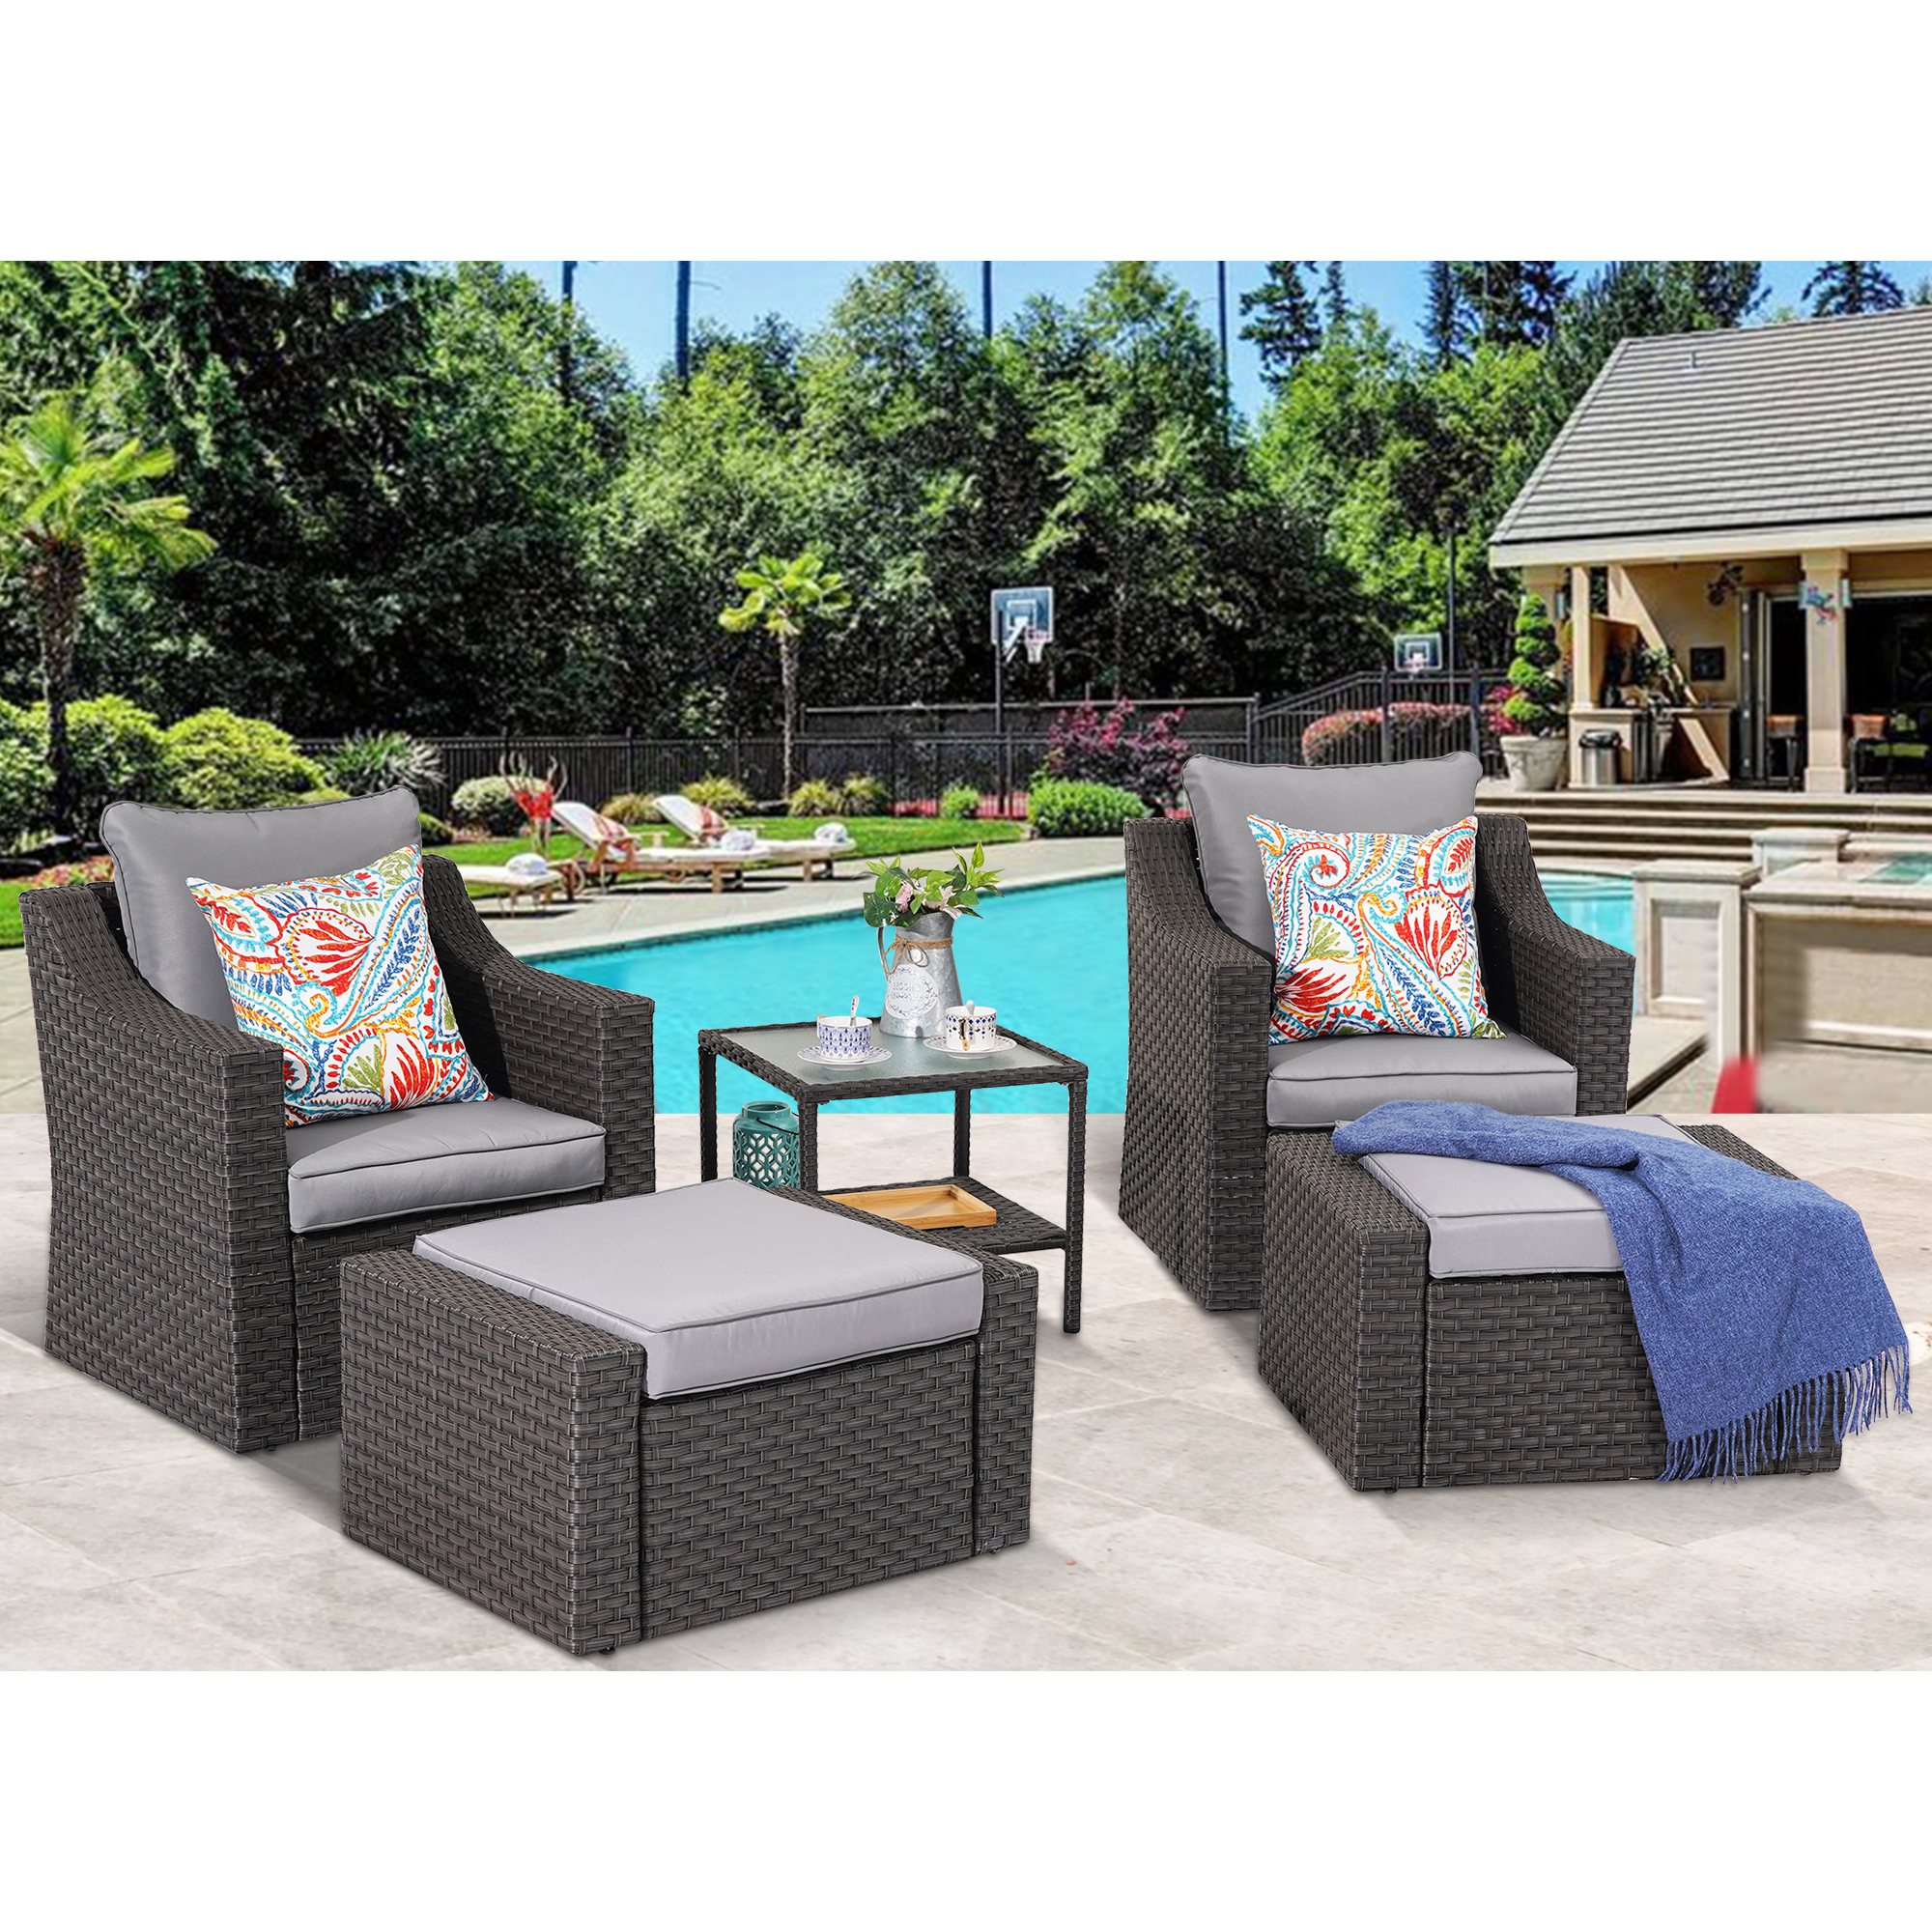 Superjoe 5 Pcs Patio Furniture Sets Outdoor Wicker Lounge Chair with Ottomans and Coffee Table, Gray - image 1 of 8